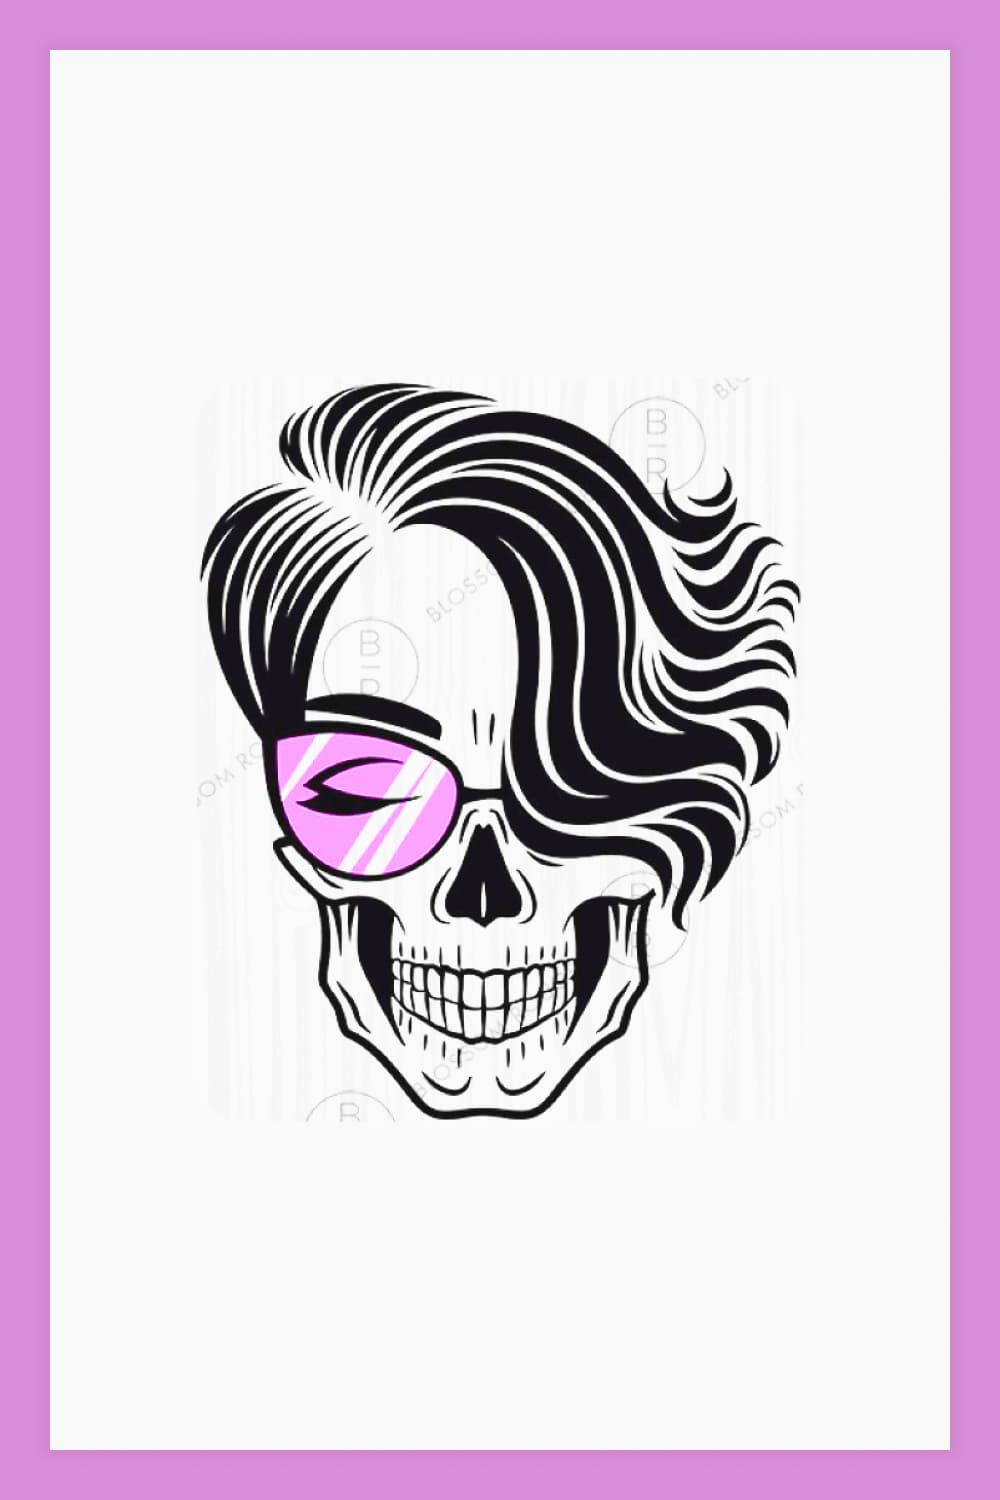 Skull with a stylish female hairstyle and pink glasses.